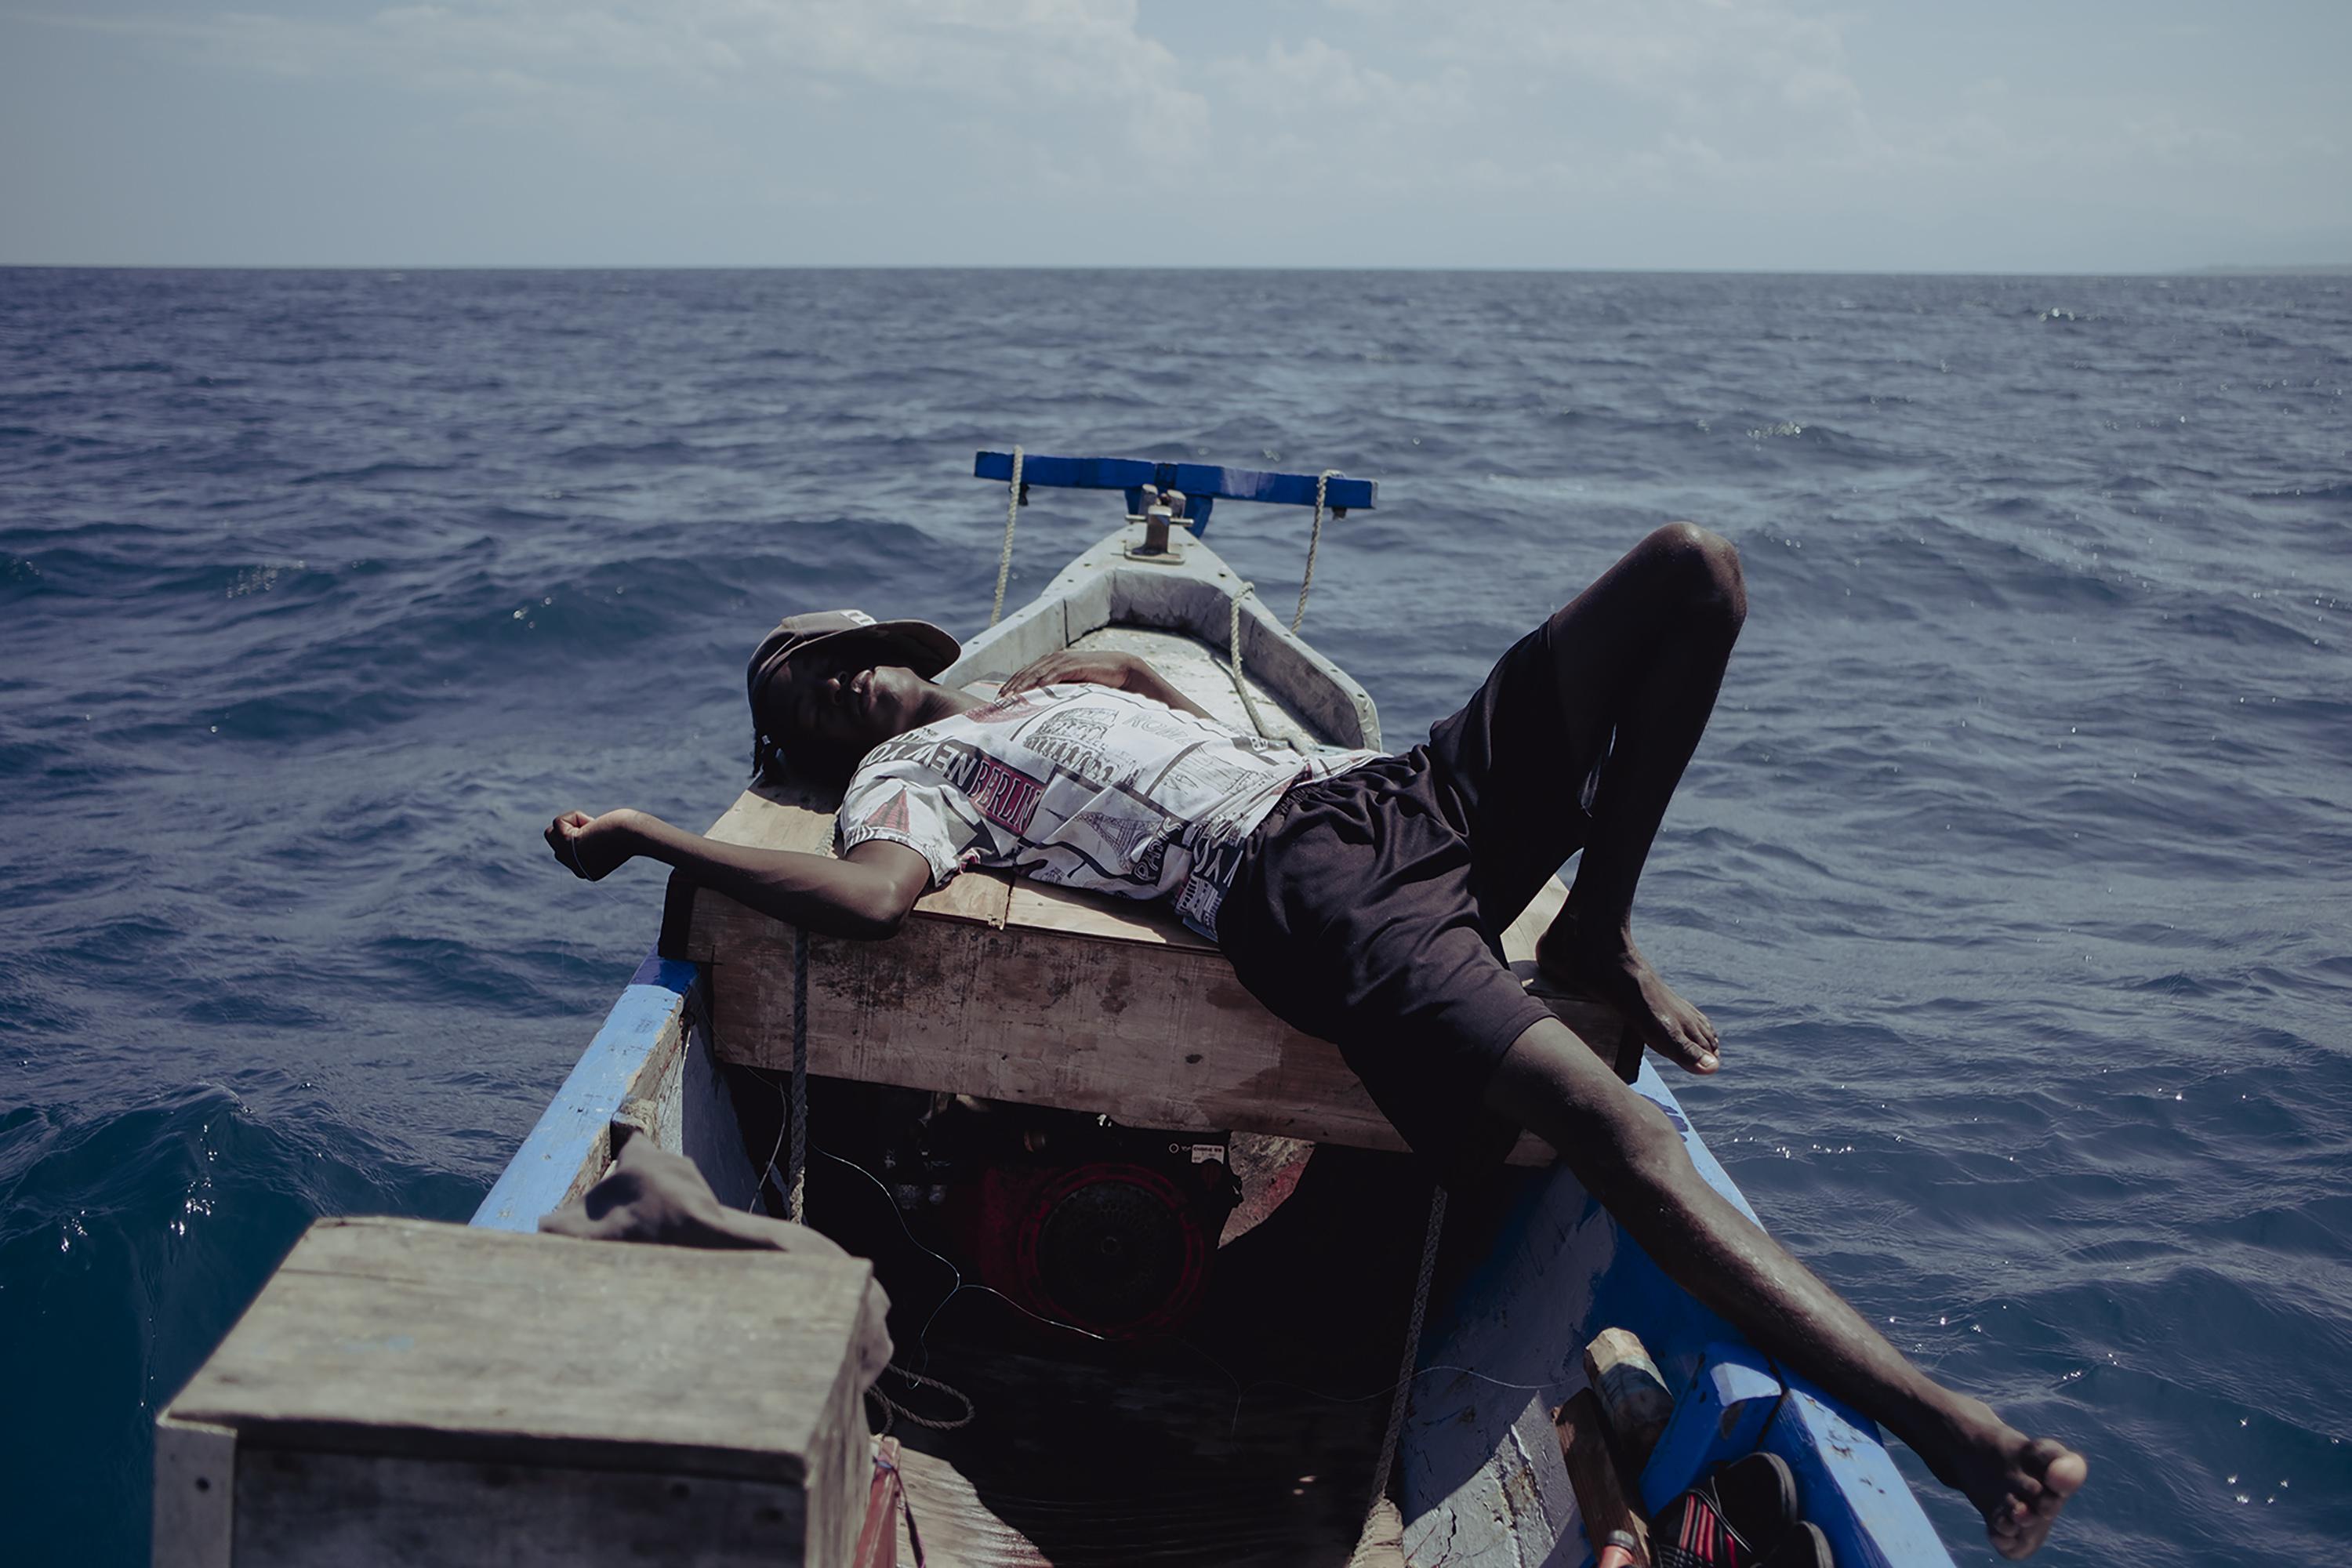 Luis Martínez, 19, was deported three times while migrating to the United States. He works as a divers’ assistant, waiting for hours in the solitude of the ocean until his companions surface. Sometimes he naps underneath the midday sun. At first he vomited constantly as he struggled to find his sea legs. “Last time they deported me I was in Monterrey, but for people like me it’s impossible to fly under the radar in other countries,” he says. “I don’t like my job, but I have no other choice.”